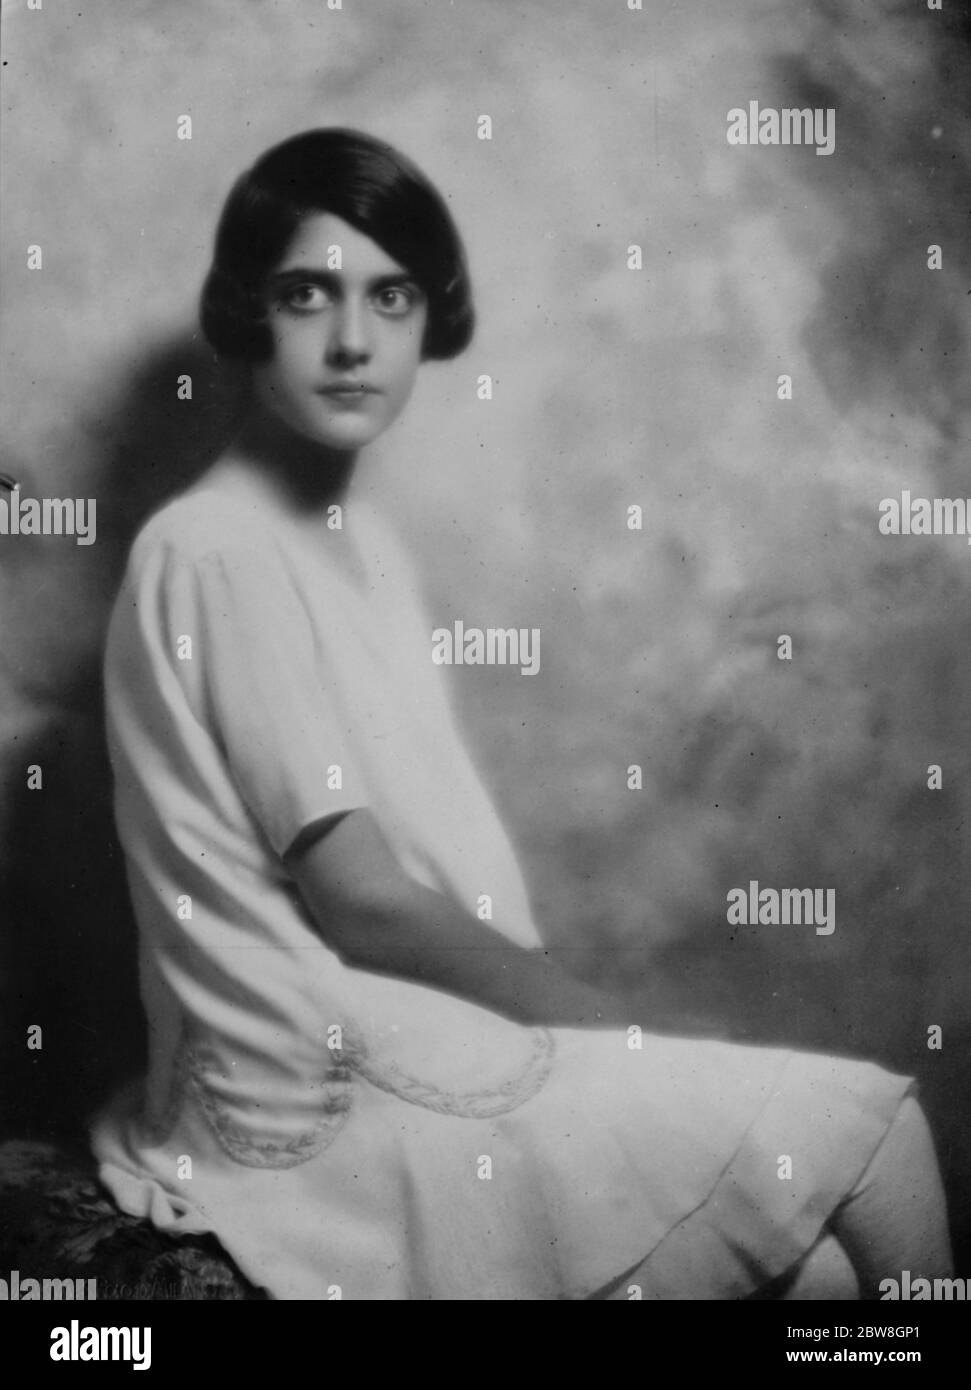 The King of Italy ' s christmas box . New photograph of the young Princess Maria . The striking photograph of Princess Maria , daughter of the King of Italy has just reached London . Born on December 26th , 1914 , she is affectionately regarded as ' Father ' s Christmas Box ' . 25 April 1930 Stock Photo